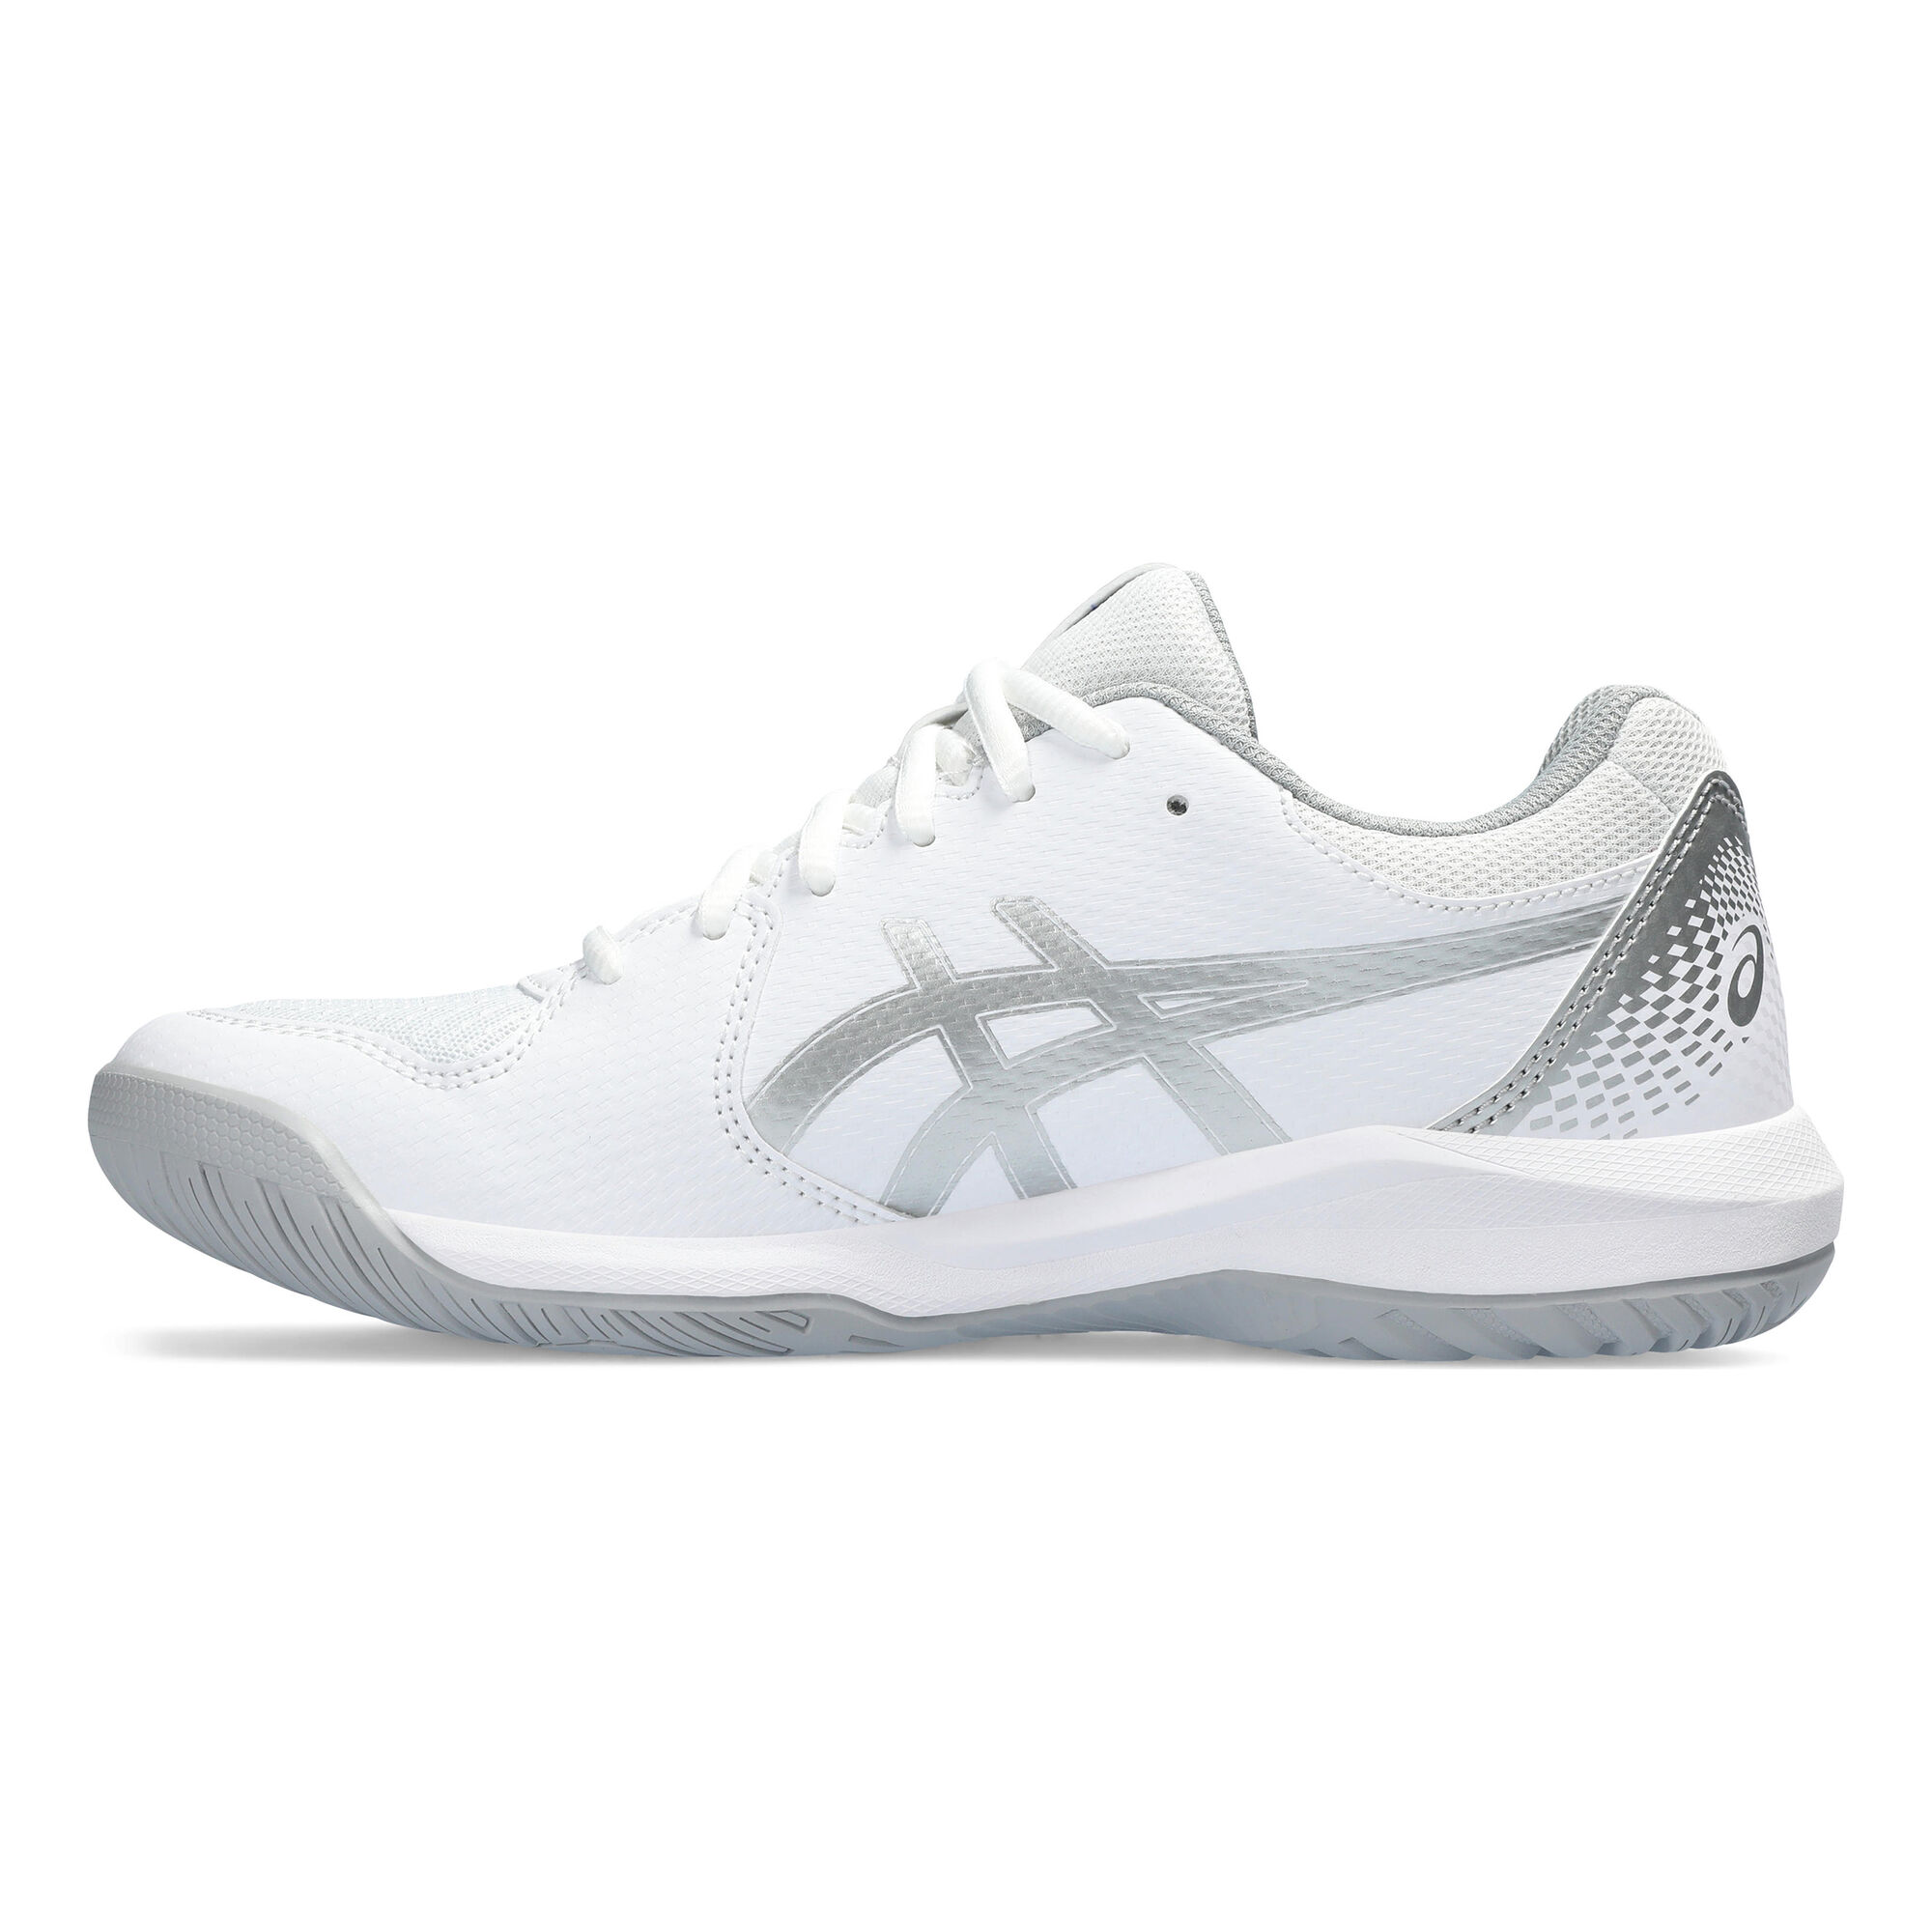 CHAUSSURES ASICS FEMME GEL DEDICATE 8 TOUTES SURFACES - Chaussures